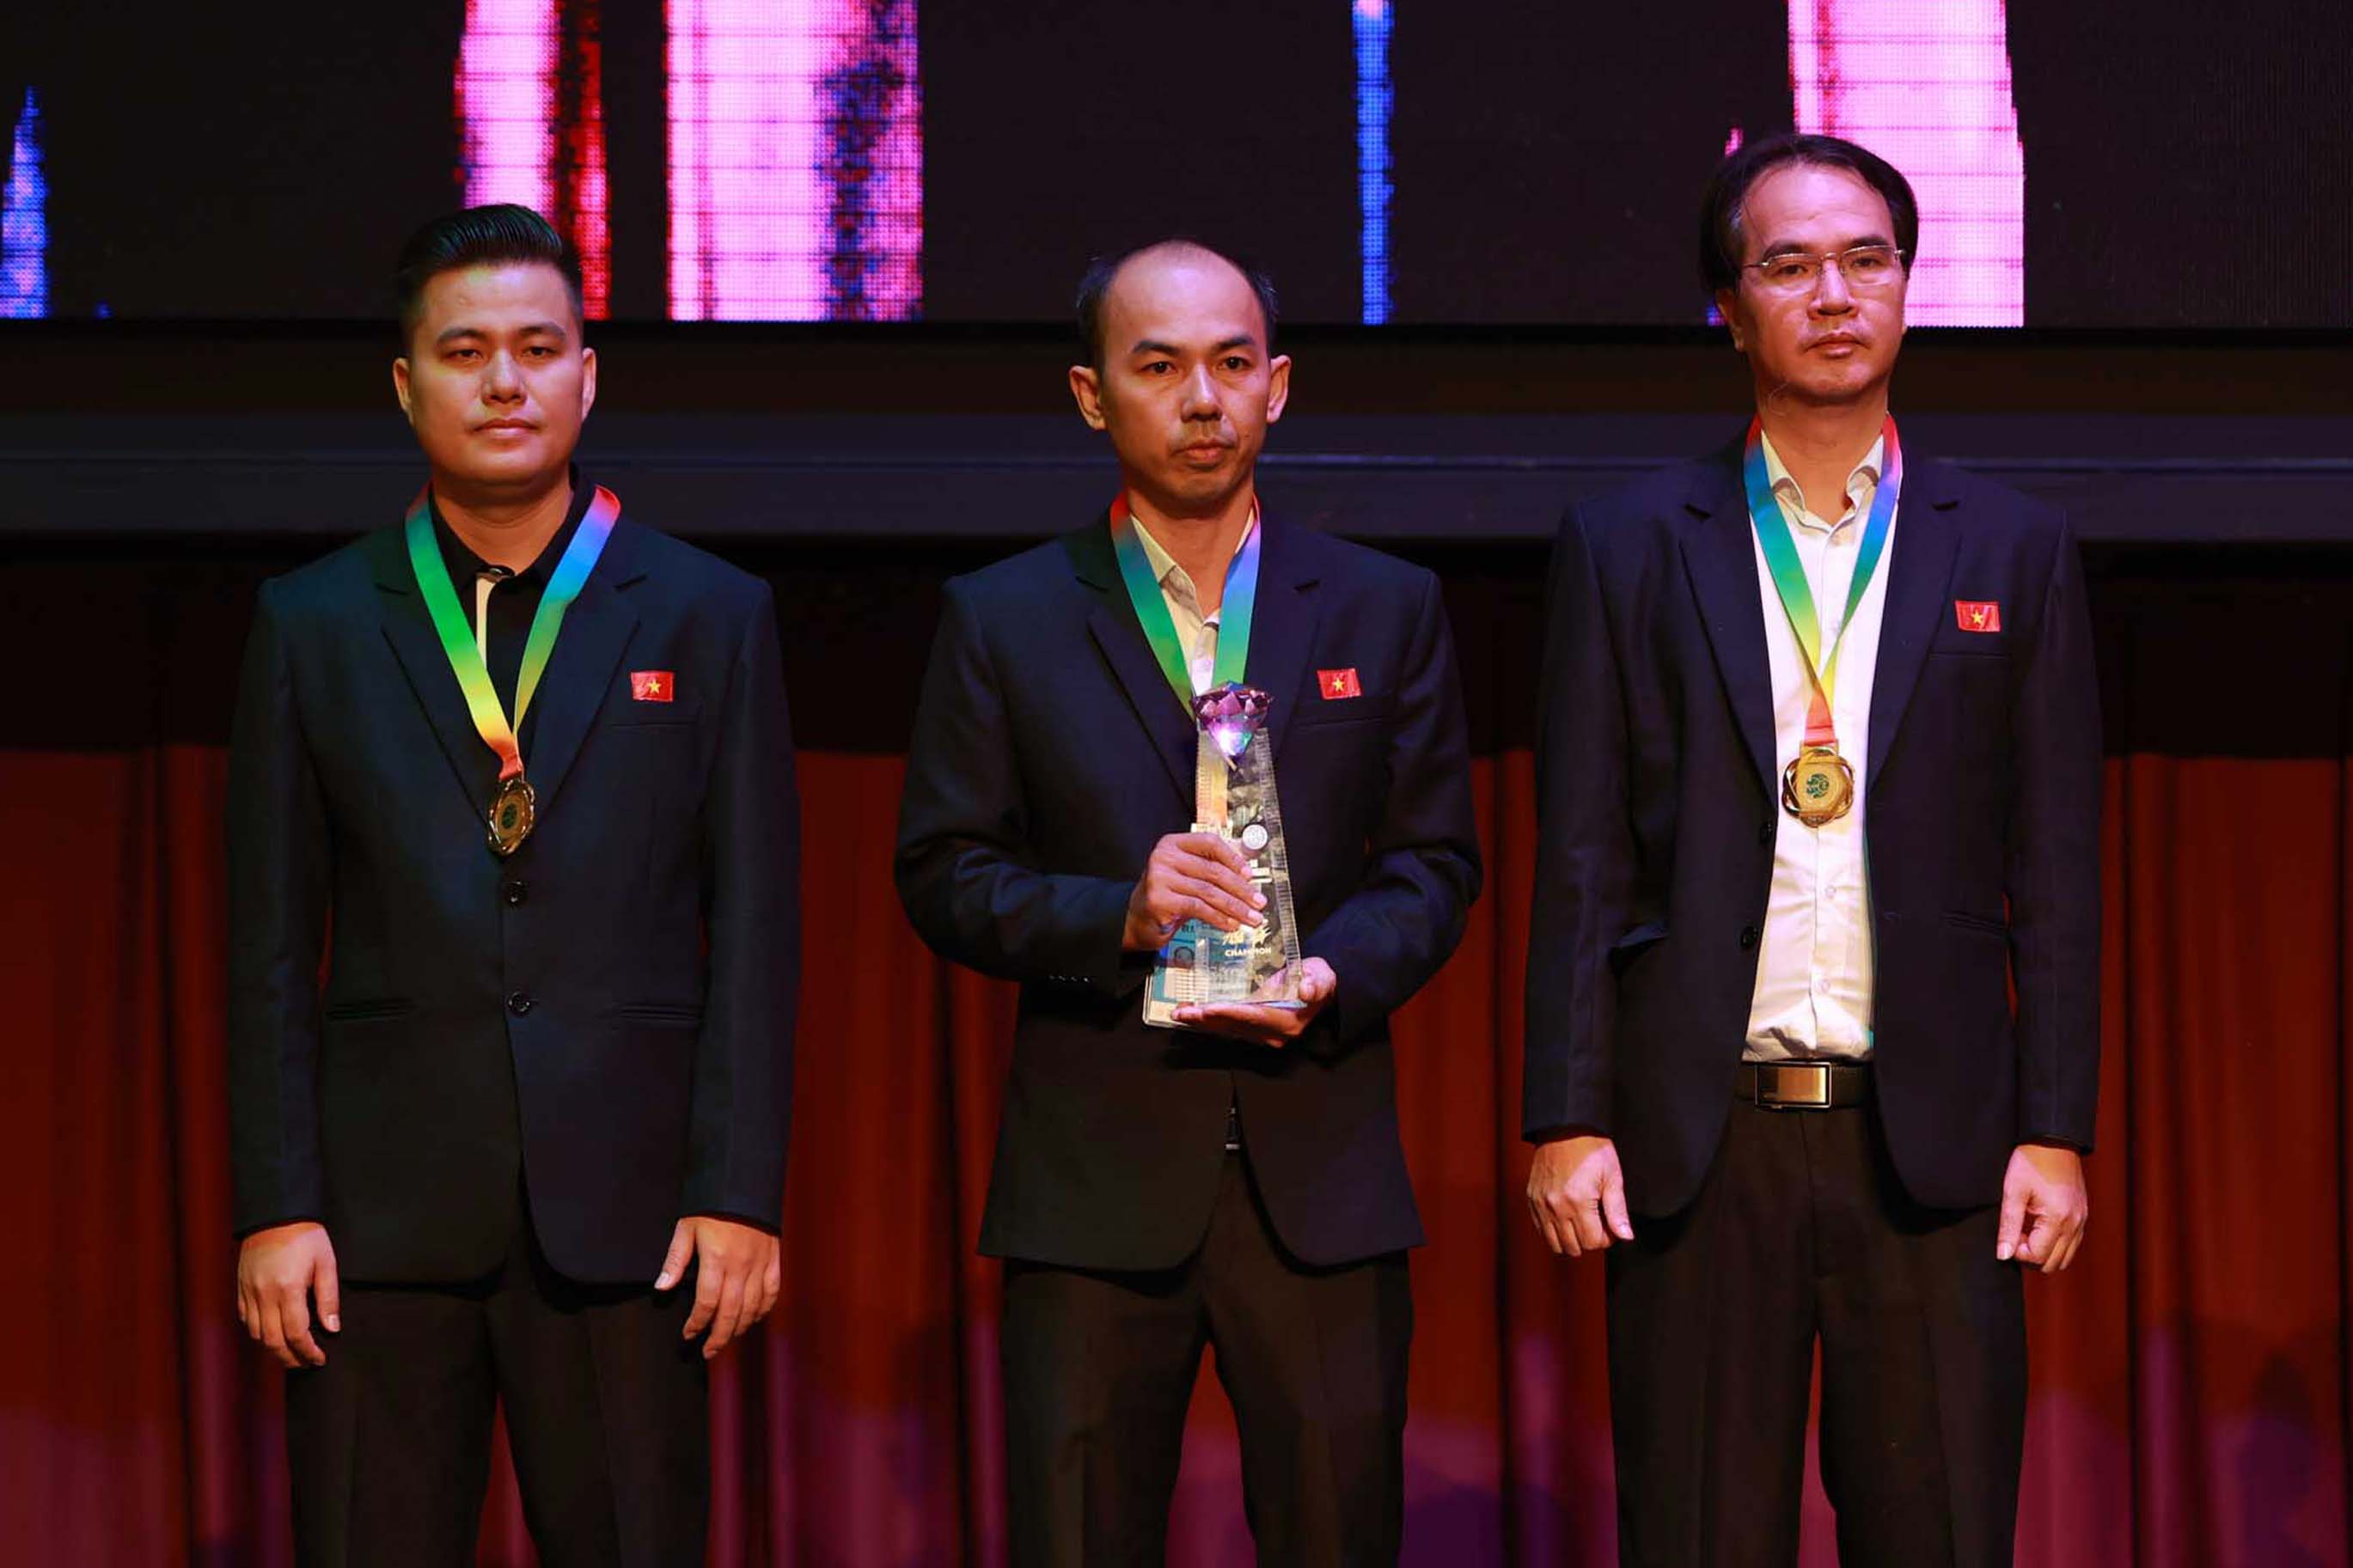 Men's Team Champion (Vietnam: Nguyen Thanh Bao & Lai Ly Huynh with Coach Vo Minh Nhat)